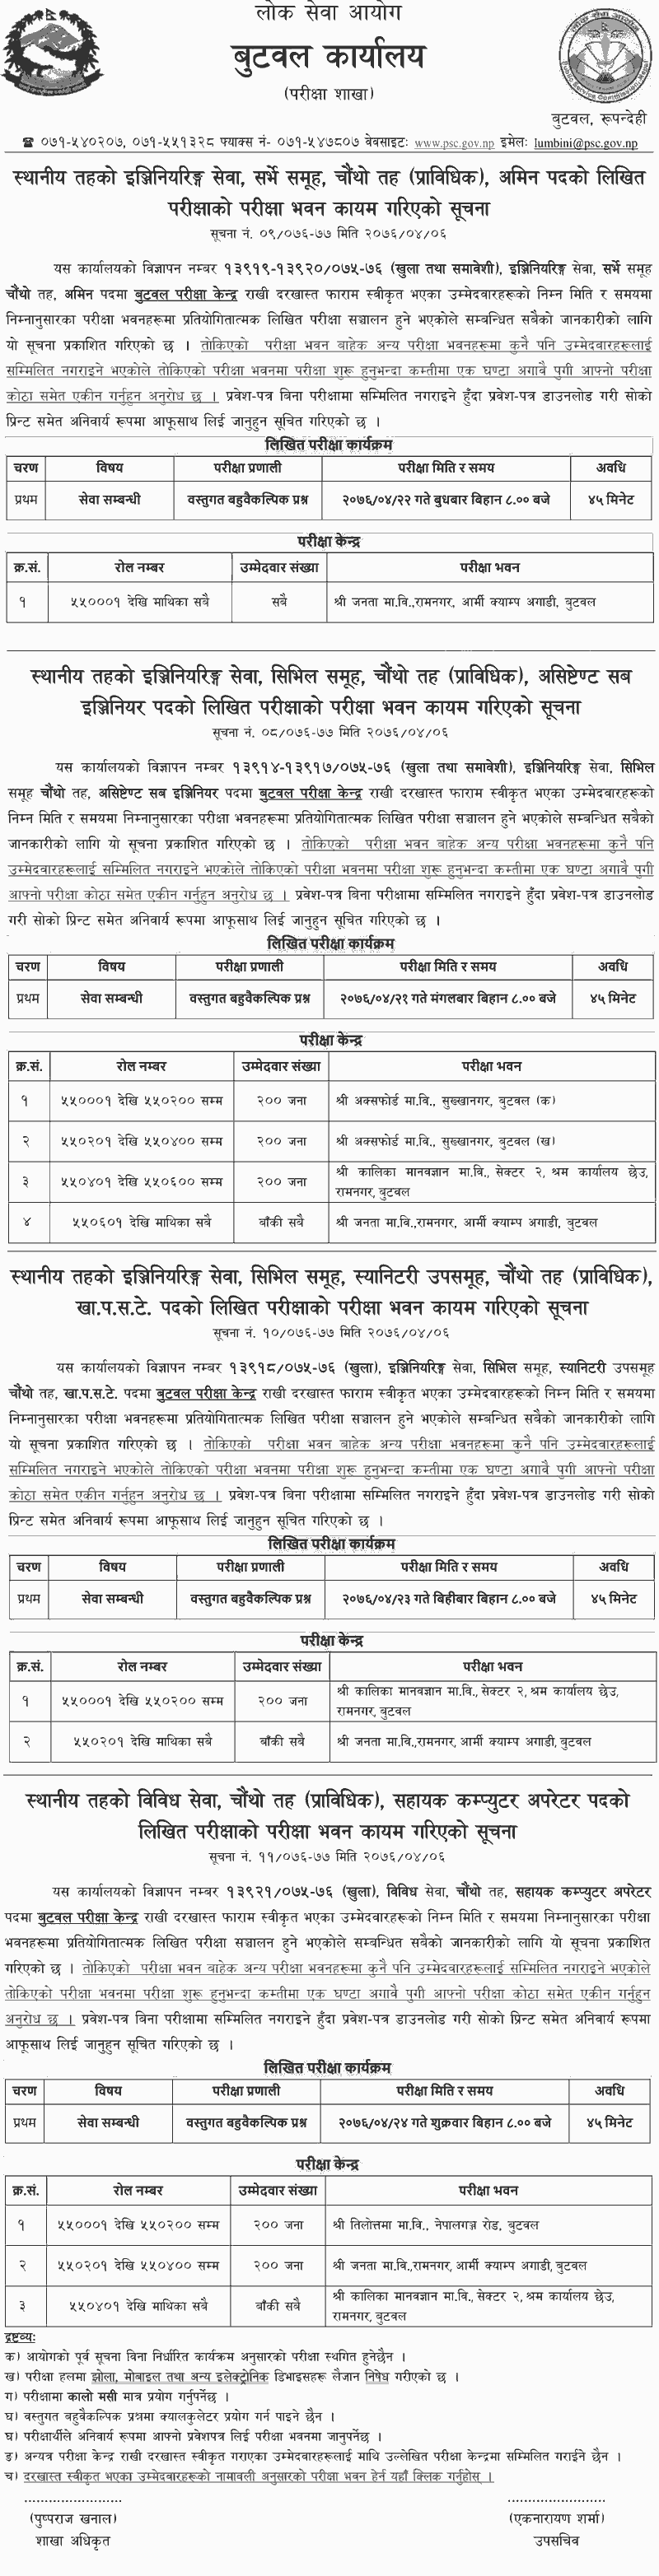 Local Level Technical 4th Level Written Exam Center - Butwal